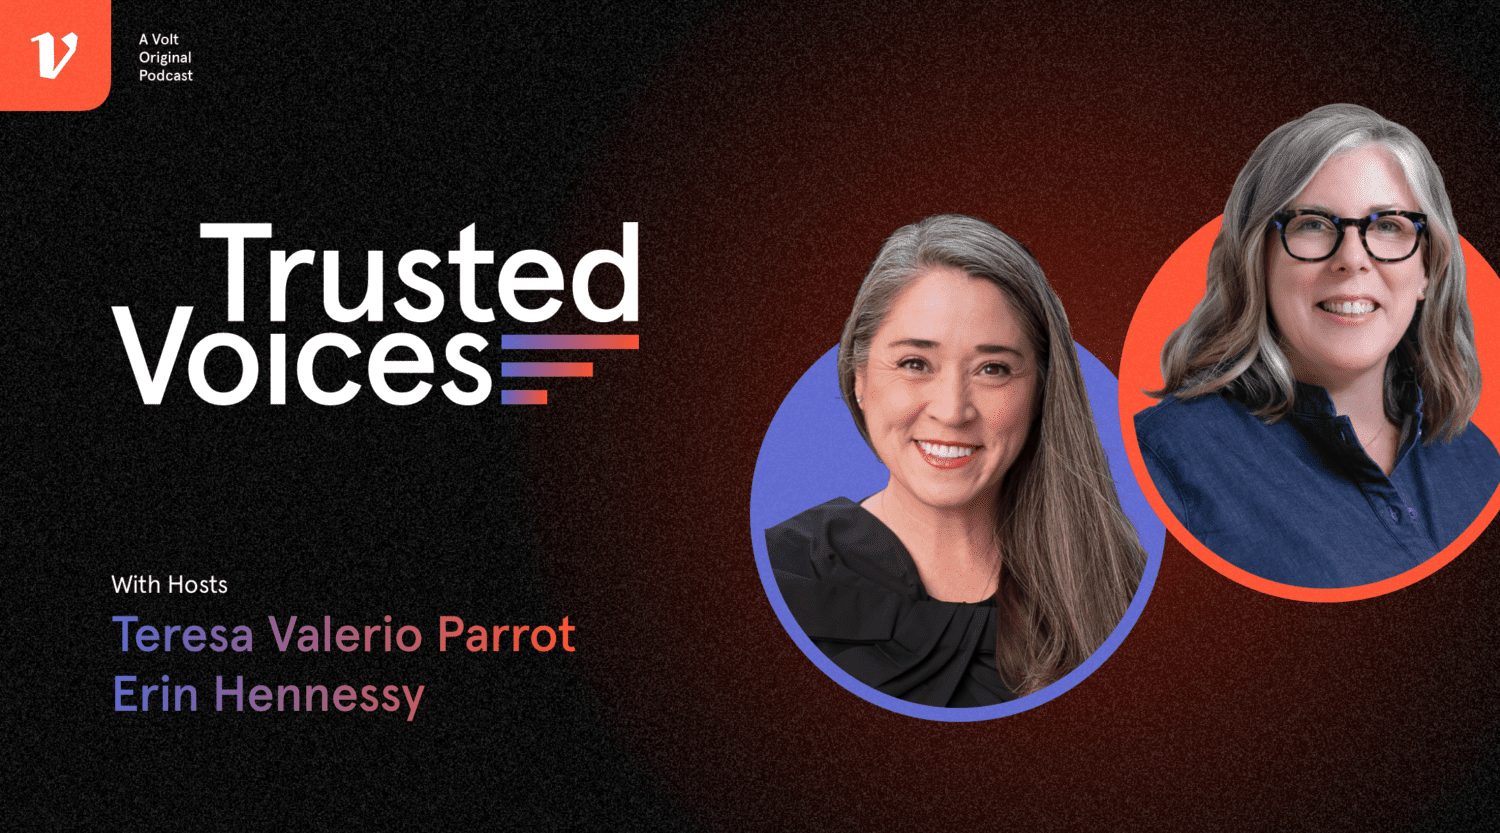 Trusted Voices Podcast branded image with headshots of Teresa Valerio Parrot and Erin A. Hennessy